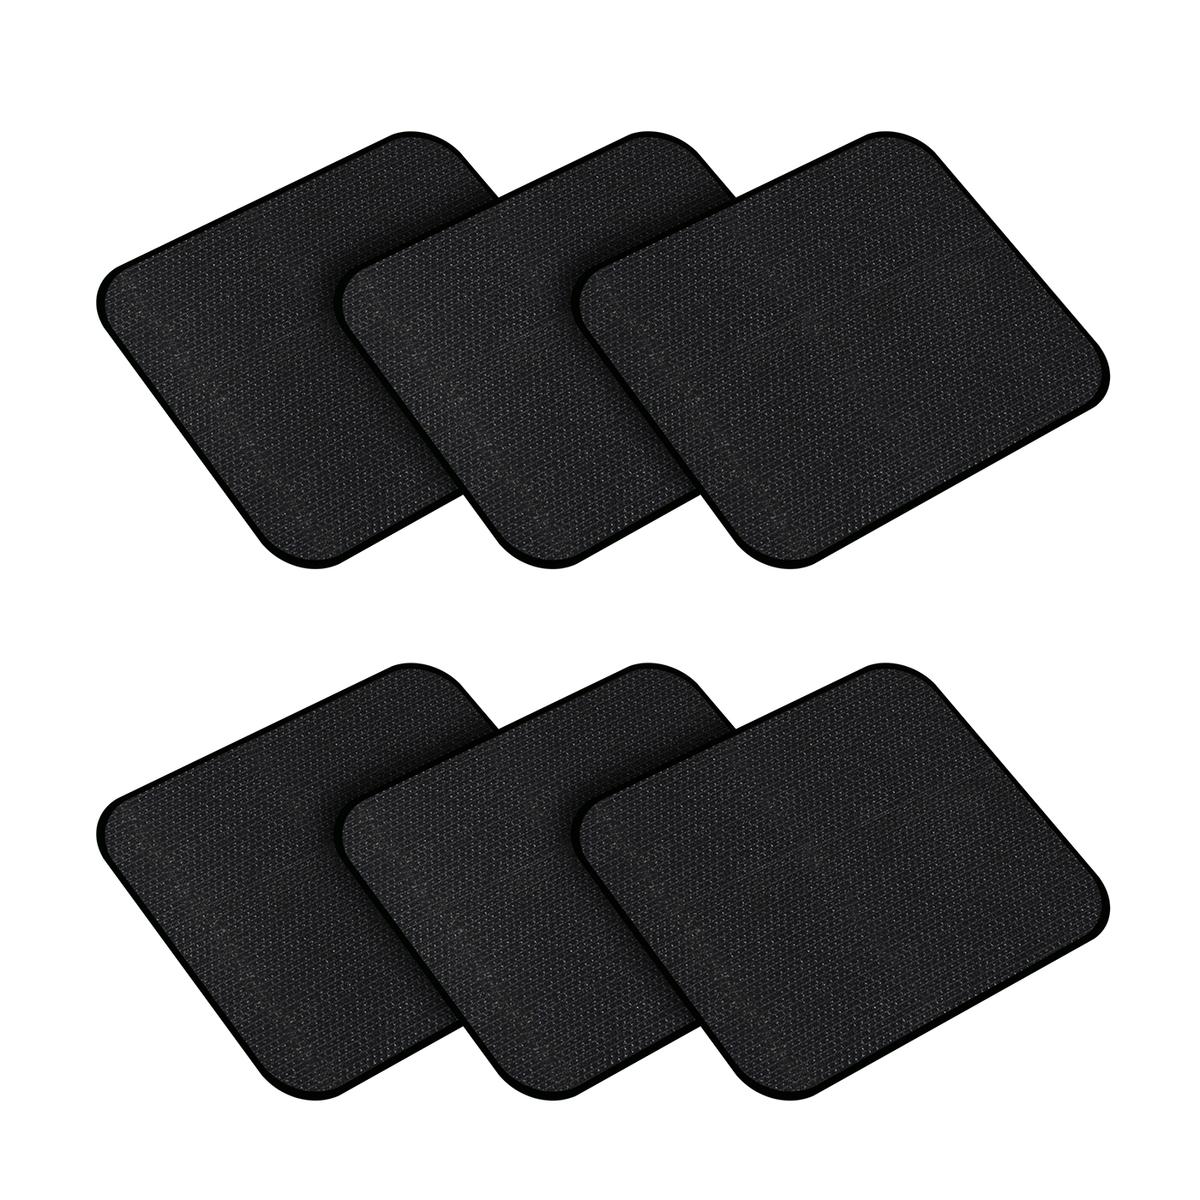 ActionHeat Adhesive Pads For Jacket Insert - 6 Pack - Front